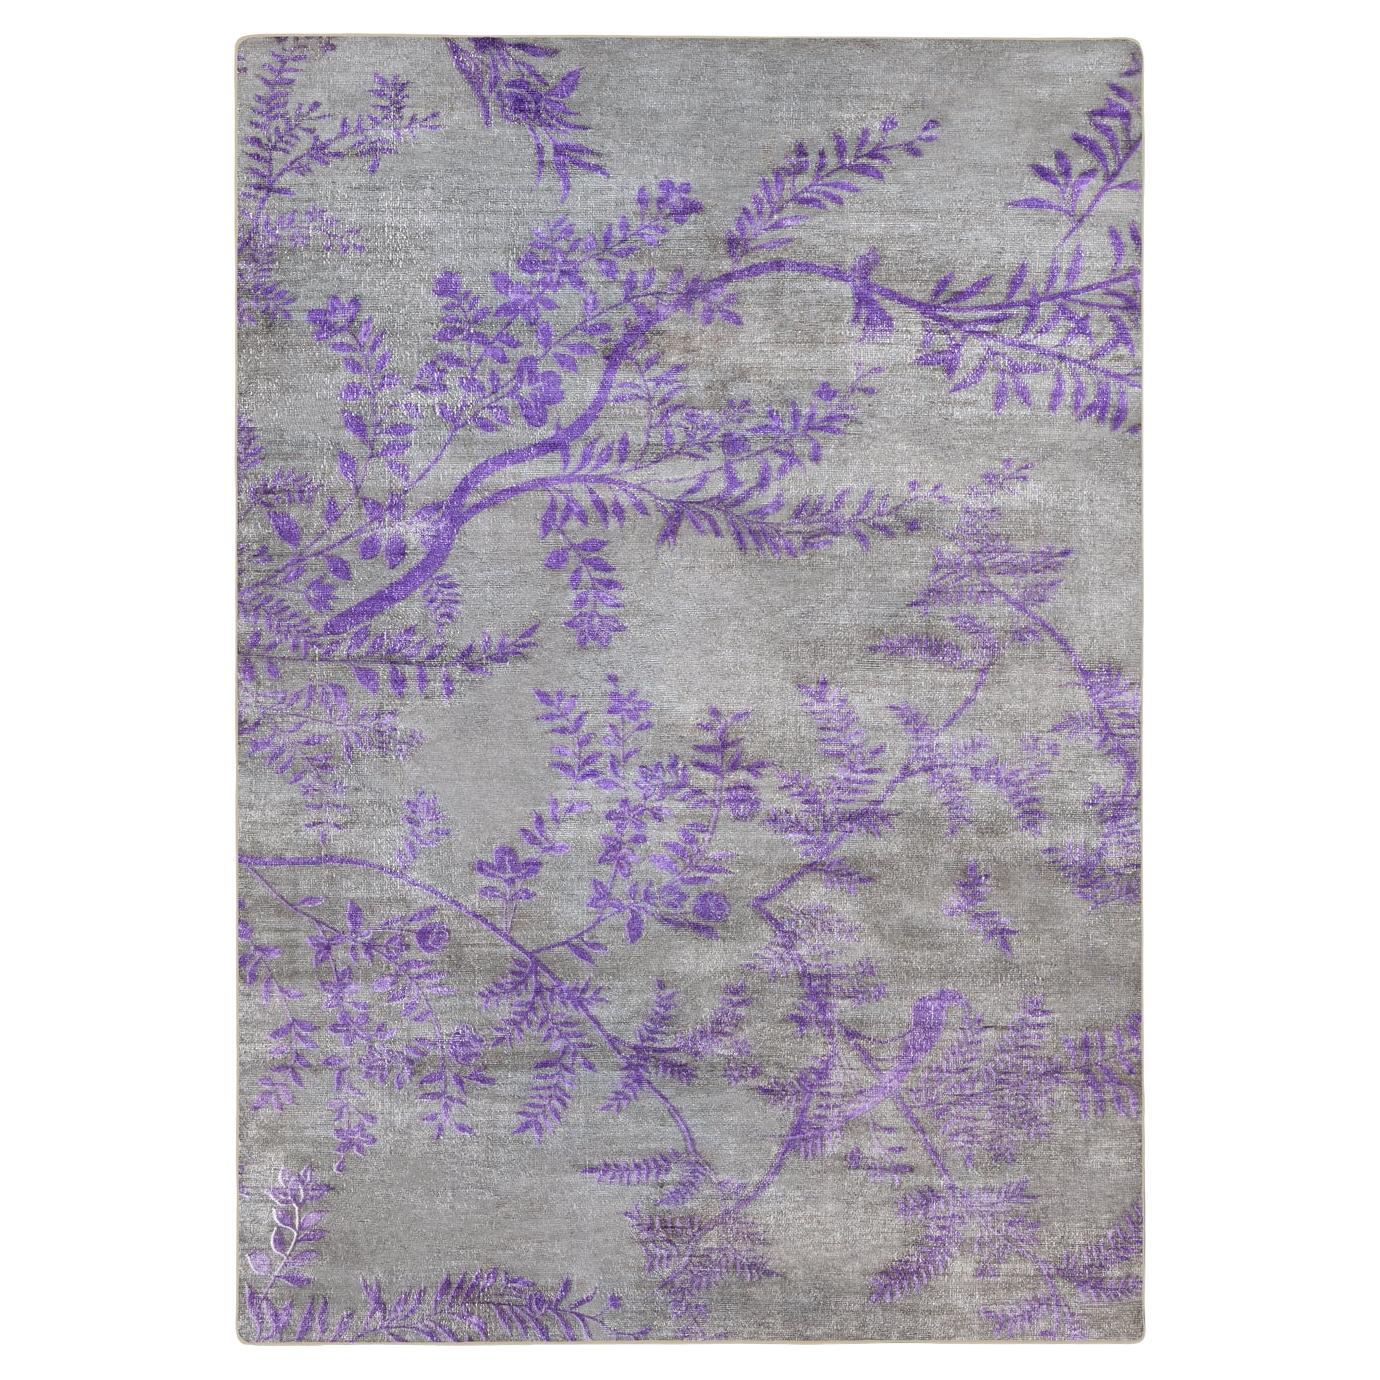 Japan Style Handwoven Technical Contemporary Rug by Deanna Comellini 300x400 cm For Sale